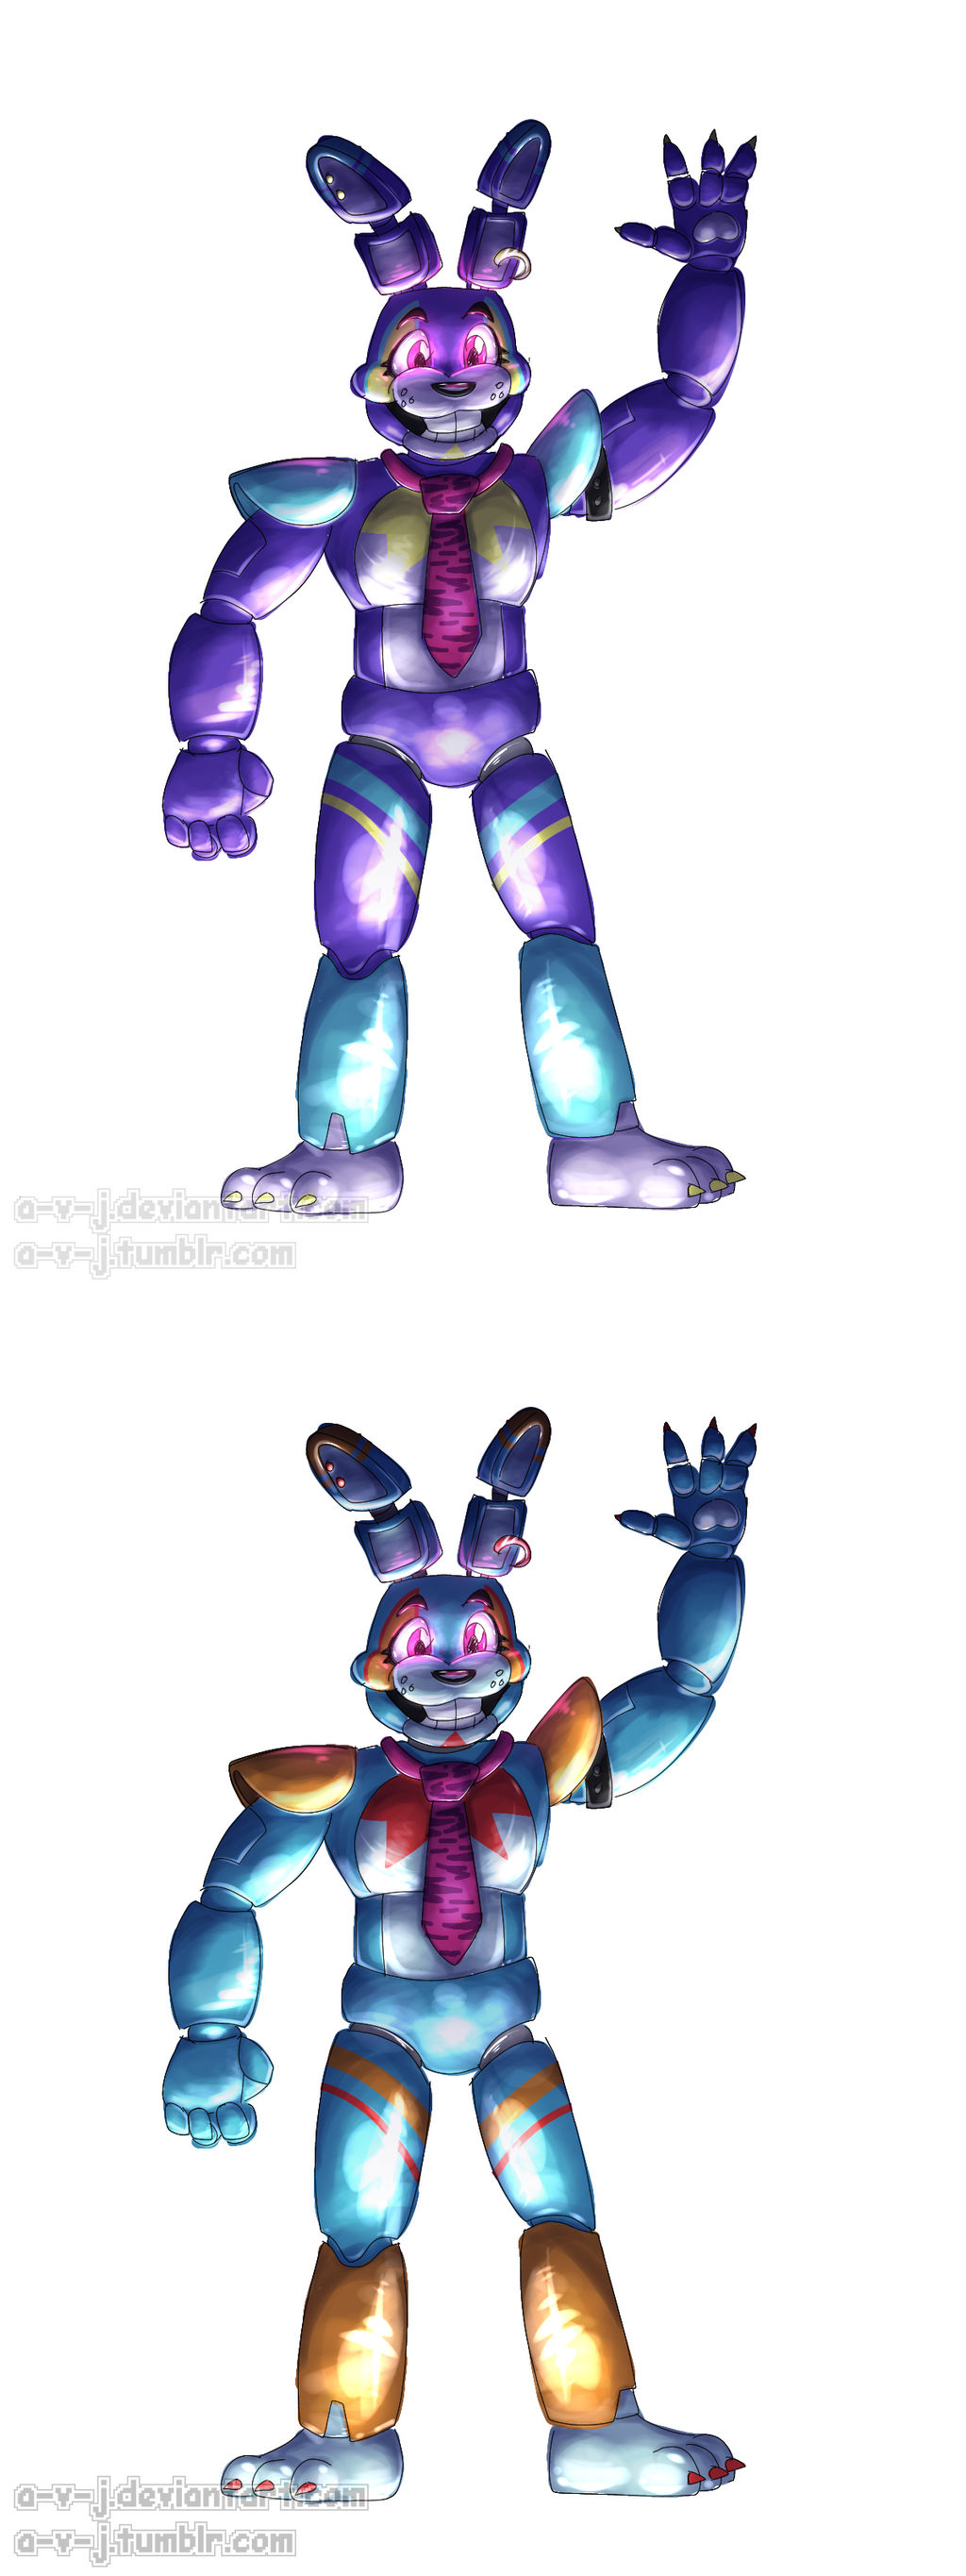 Glamrock Bonnie(shaded and recolor) by A-V-J on DeviantArt